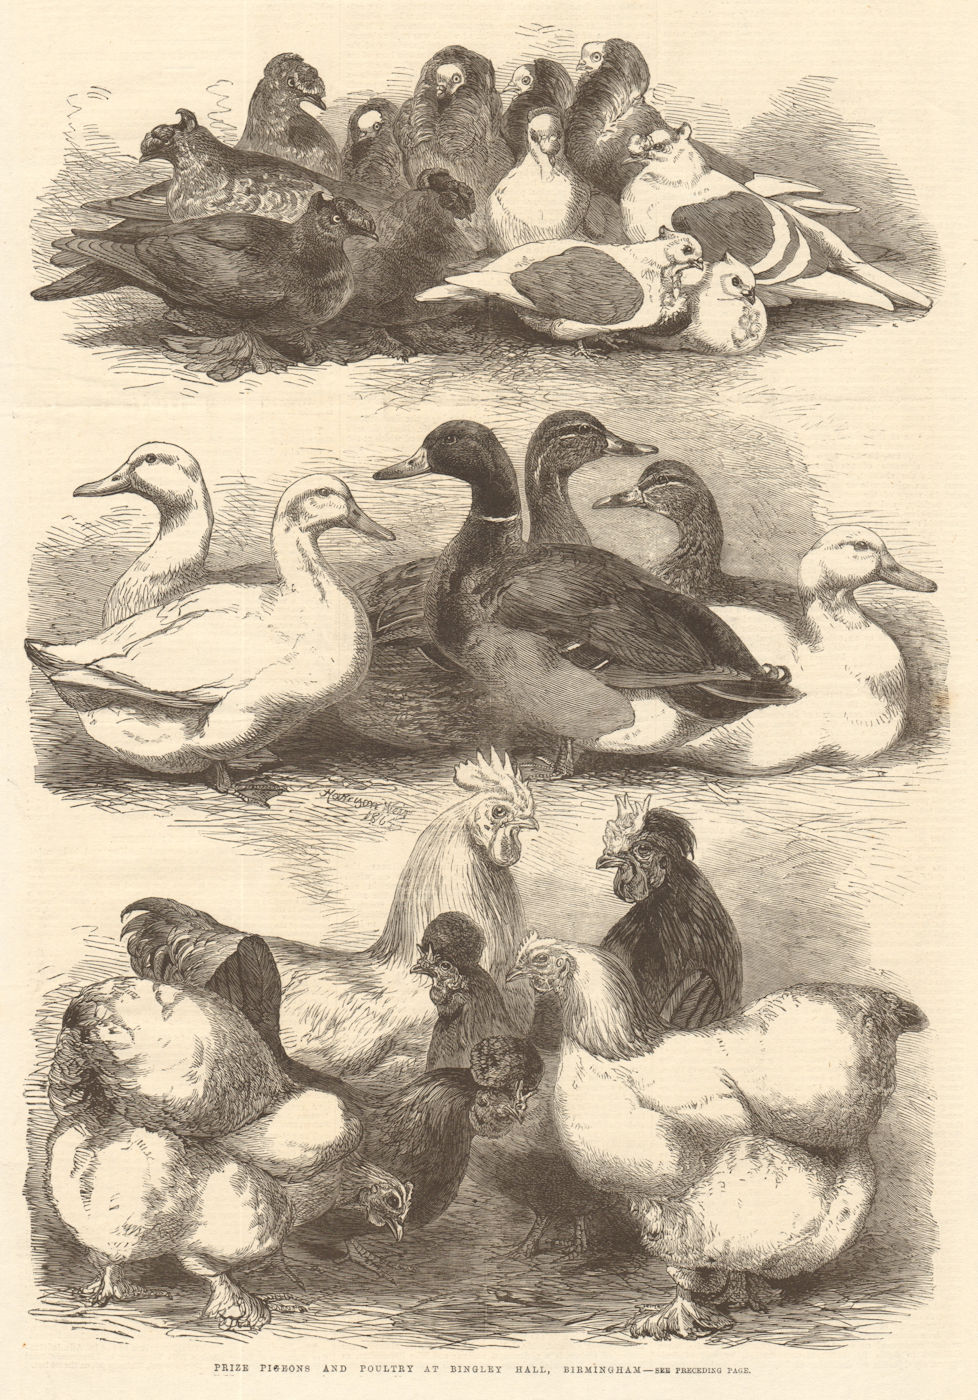 Associate Product Prize pigeons & poultry at Bingley Hall, Birmingham 1864 antique ILN full page